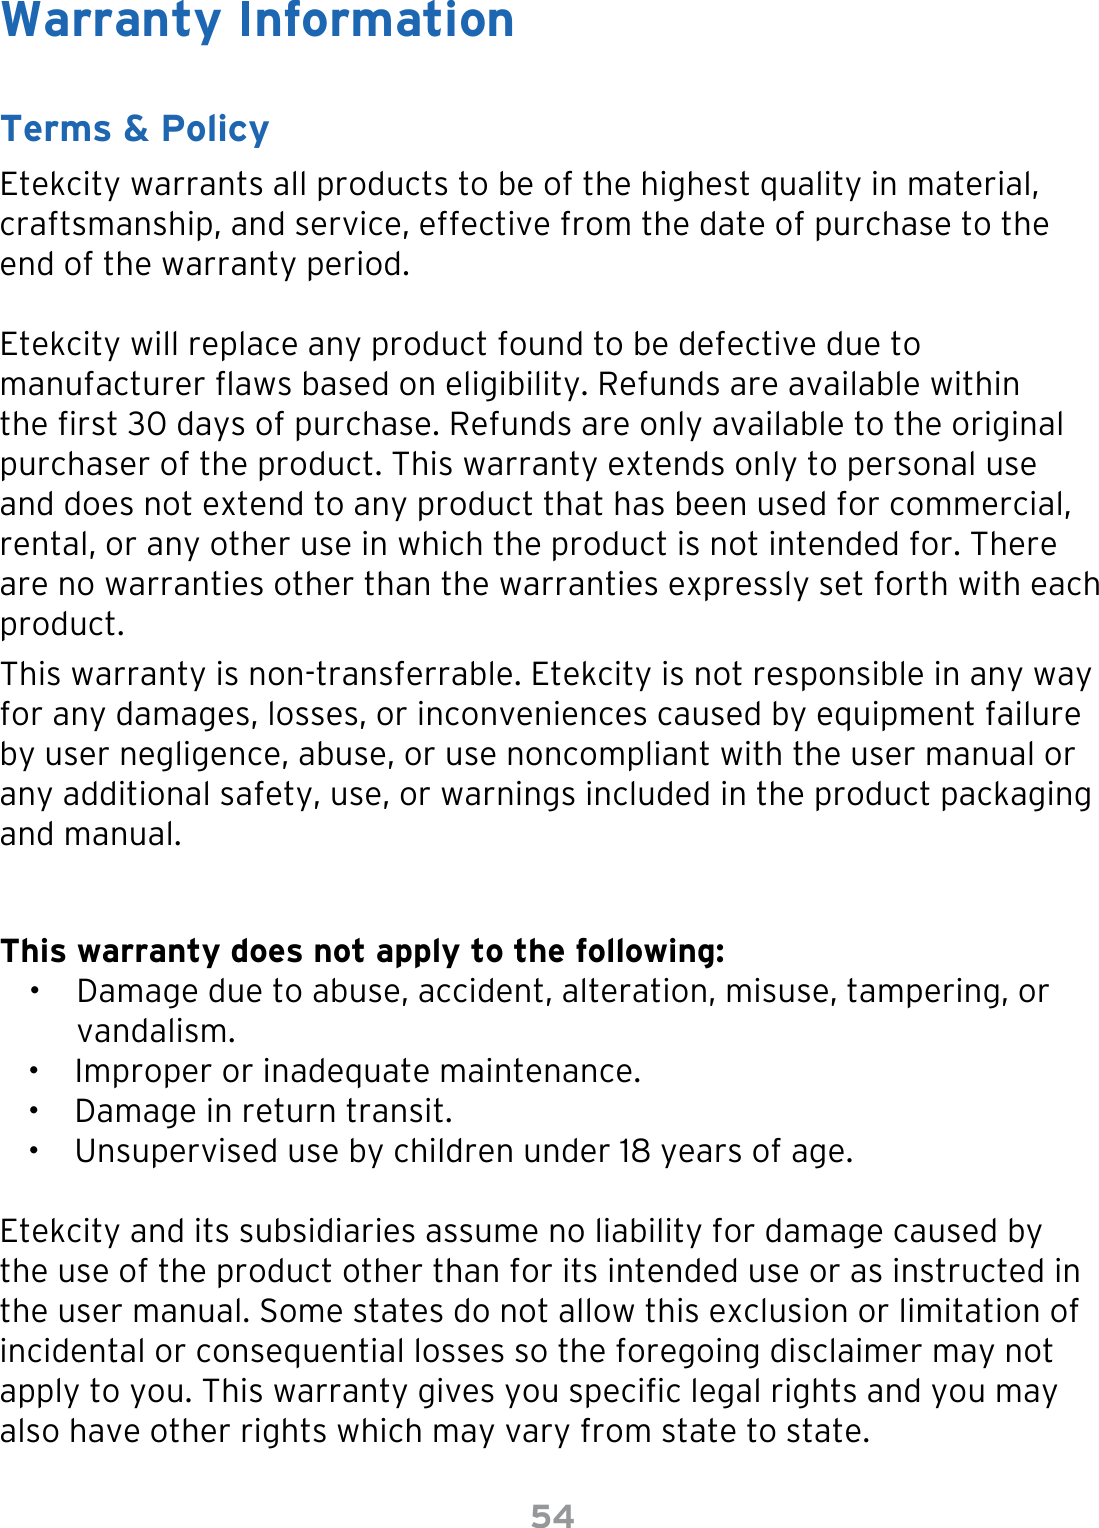 54Warranty InformationTerms &amp; PolicyEtekcity warrants all products to be of the highest quality in material, craftsmanship, and service, effective from the date of purchase to the end of the warranty period.Etekcity will replace any product found to be defective due to manufacturer aws based on eligibility. Refunds are available within the rst 30 days of purchase. Refunds are only available to the original purchaser of the product. This warranty extends only to personal use and does not extend to any product that has been used for commercial, rental, or any other use in which the product is not intended for. There are no warranties other than the warranties expressly set forth with each product.This warranty is non-transferrable. Etekcity is not responsible in any way for any damages, losses, or inconveniences caused by equipment failure by user negligence, abuse, or use noncompliant with the user manual or any additional safety, use, or warnings included in the product packaging and manual.This warranty does not apply to the following:•  Damage due to abuse, accident, alteration, misuse, tampering, or  vandalism.•  Improper or inadequate maintenance. •  Damage in return transit.•  Unsupervised use by children under 18 years of age.Etekcity and its subsidiaries assume no liability for damage caused by the use of the product other than for its intended use or as instructed in the user manual. Some states do not allow this exclusion or limitation of incidental or consequential losses so the foregoing disclaimer may not apply to you. This warranty gives you specic legal rights and you may also have other rights which may vary from state to state.